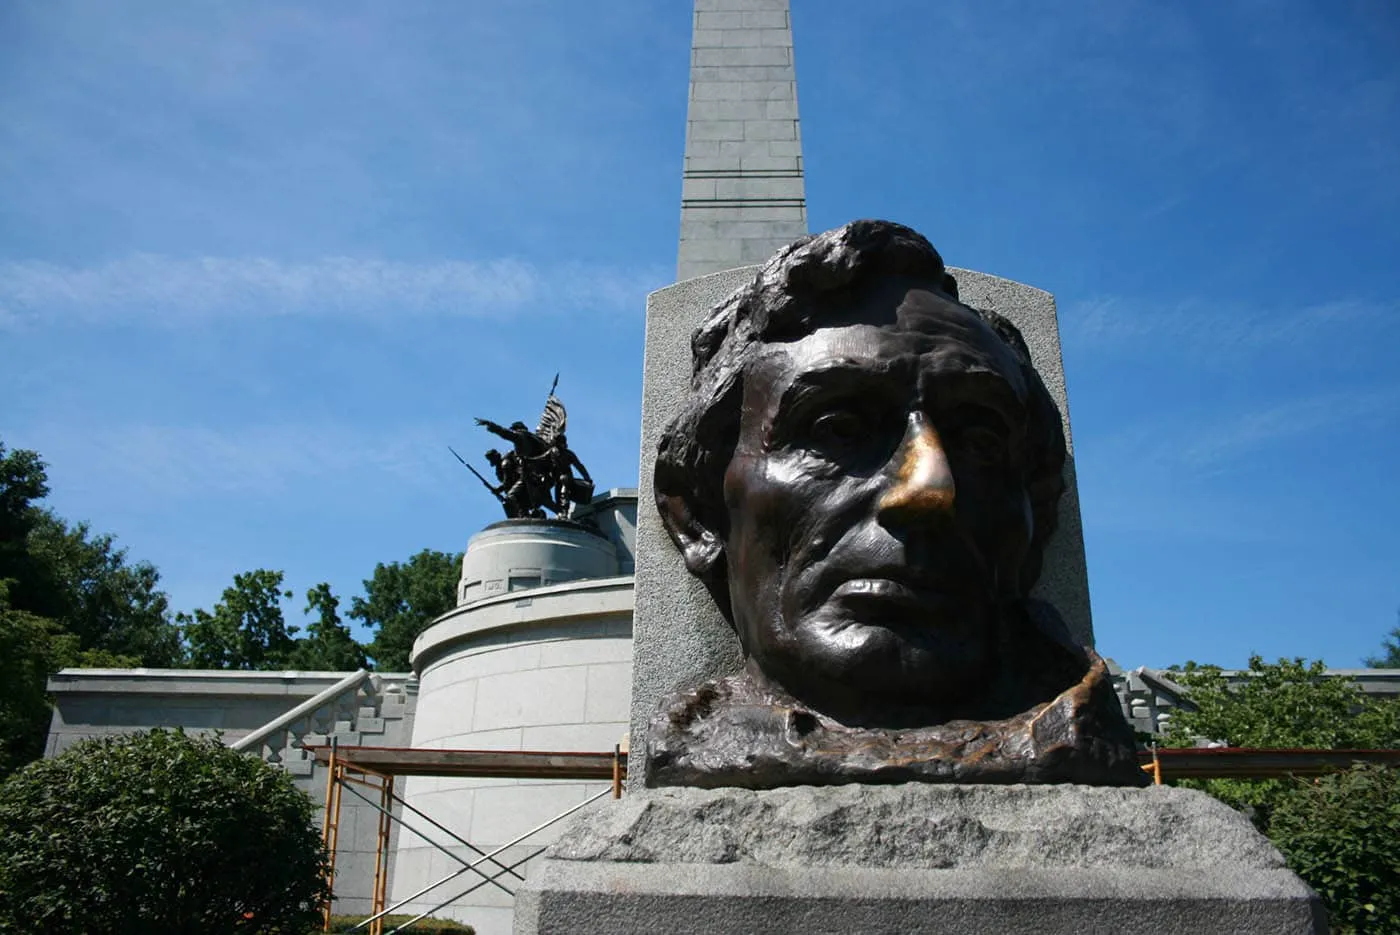 Abraham Lincoln's Lucky Nose in Springfield, Illinois - rub Lincoln's nose for good luck at Oak Ridge Cemetery in Springfield, Illinois